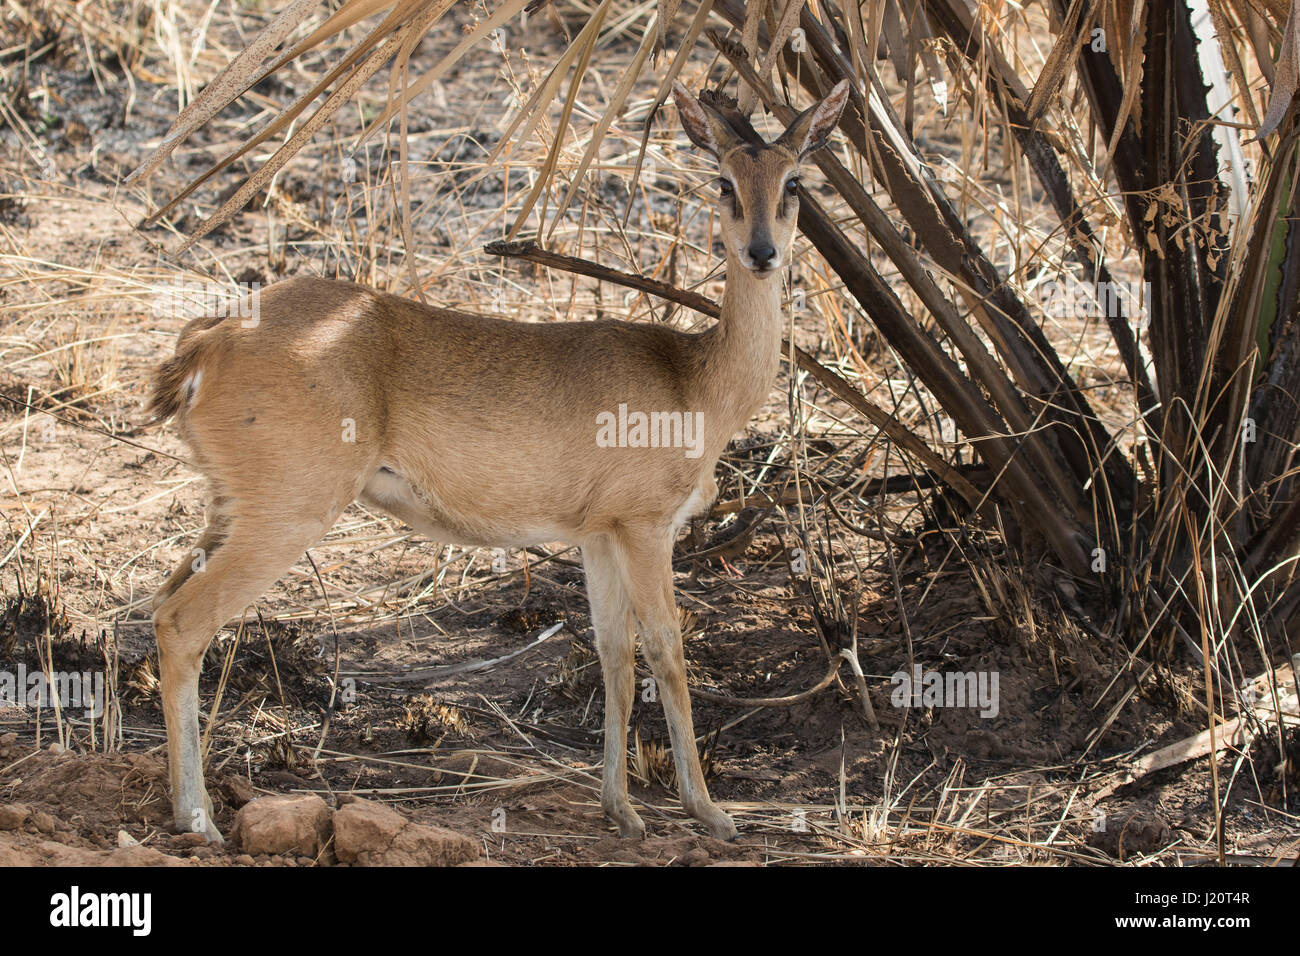 female oribi standing under the dried leaves of the palm tree in the shrub savanna in the dry season Stock Photo